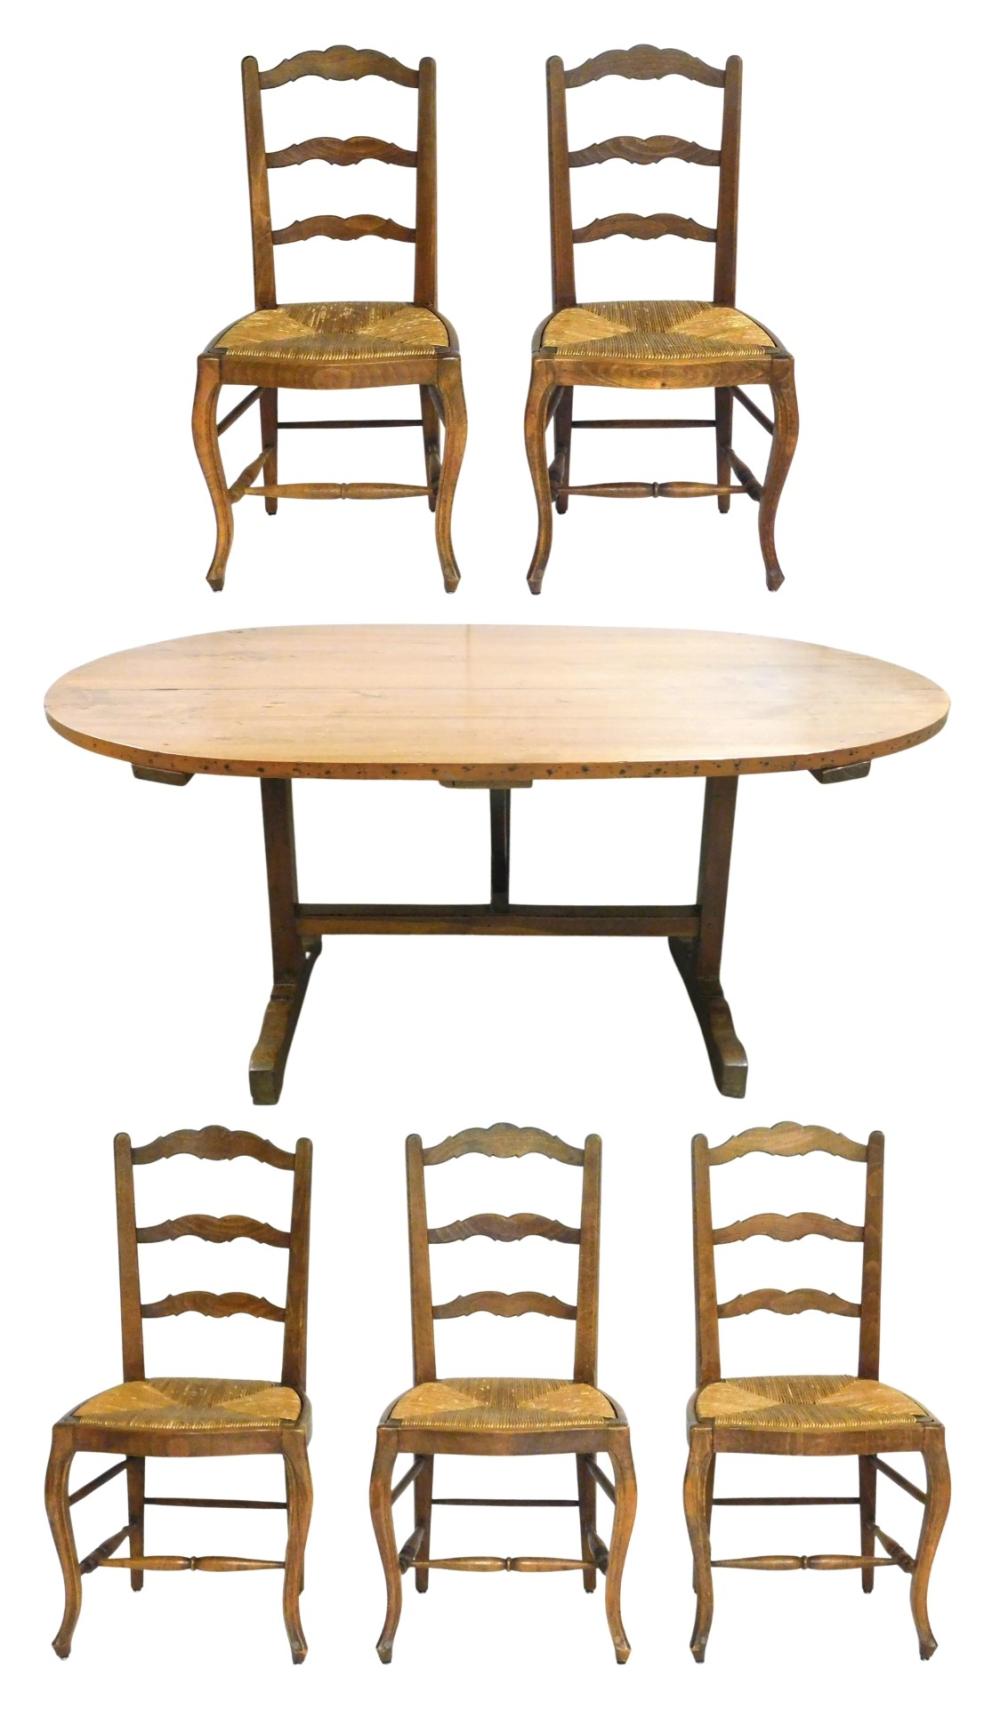 FRENCH PROVINCIAL STYLE OVAL DINING